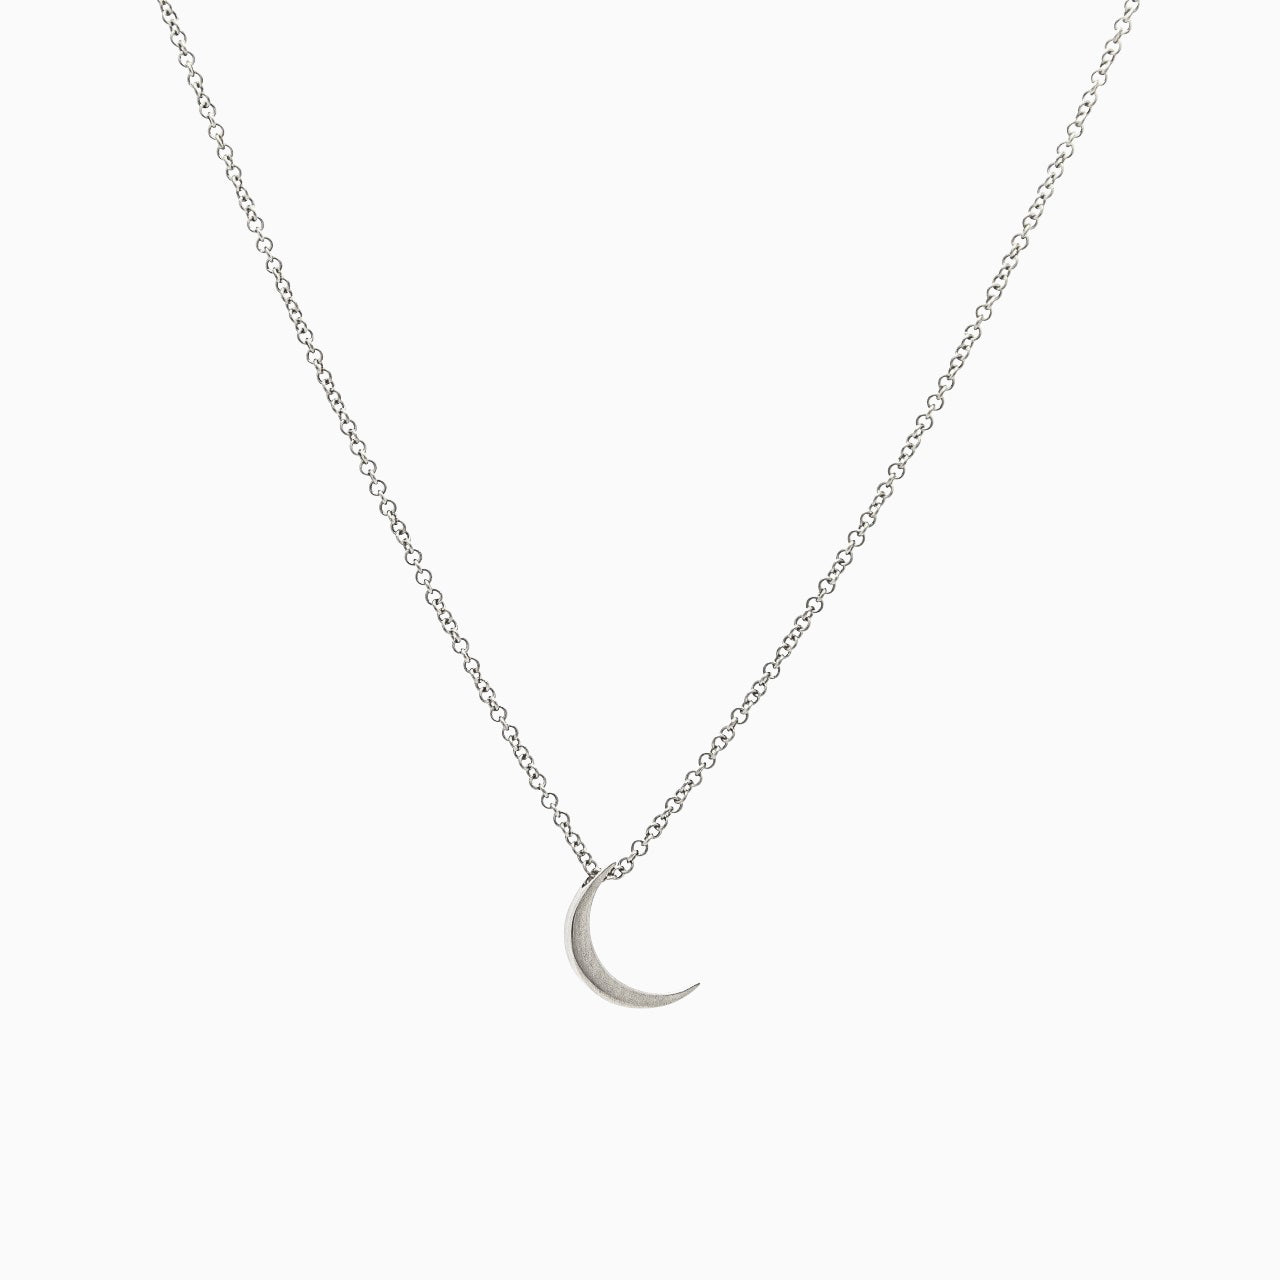 Cutie Cat on the Moon Gold-Plated Pendant Necklace - Seven Season